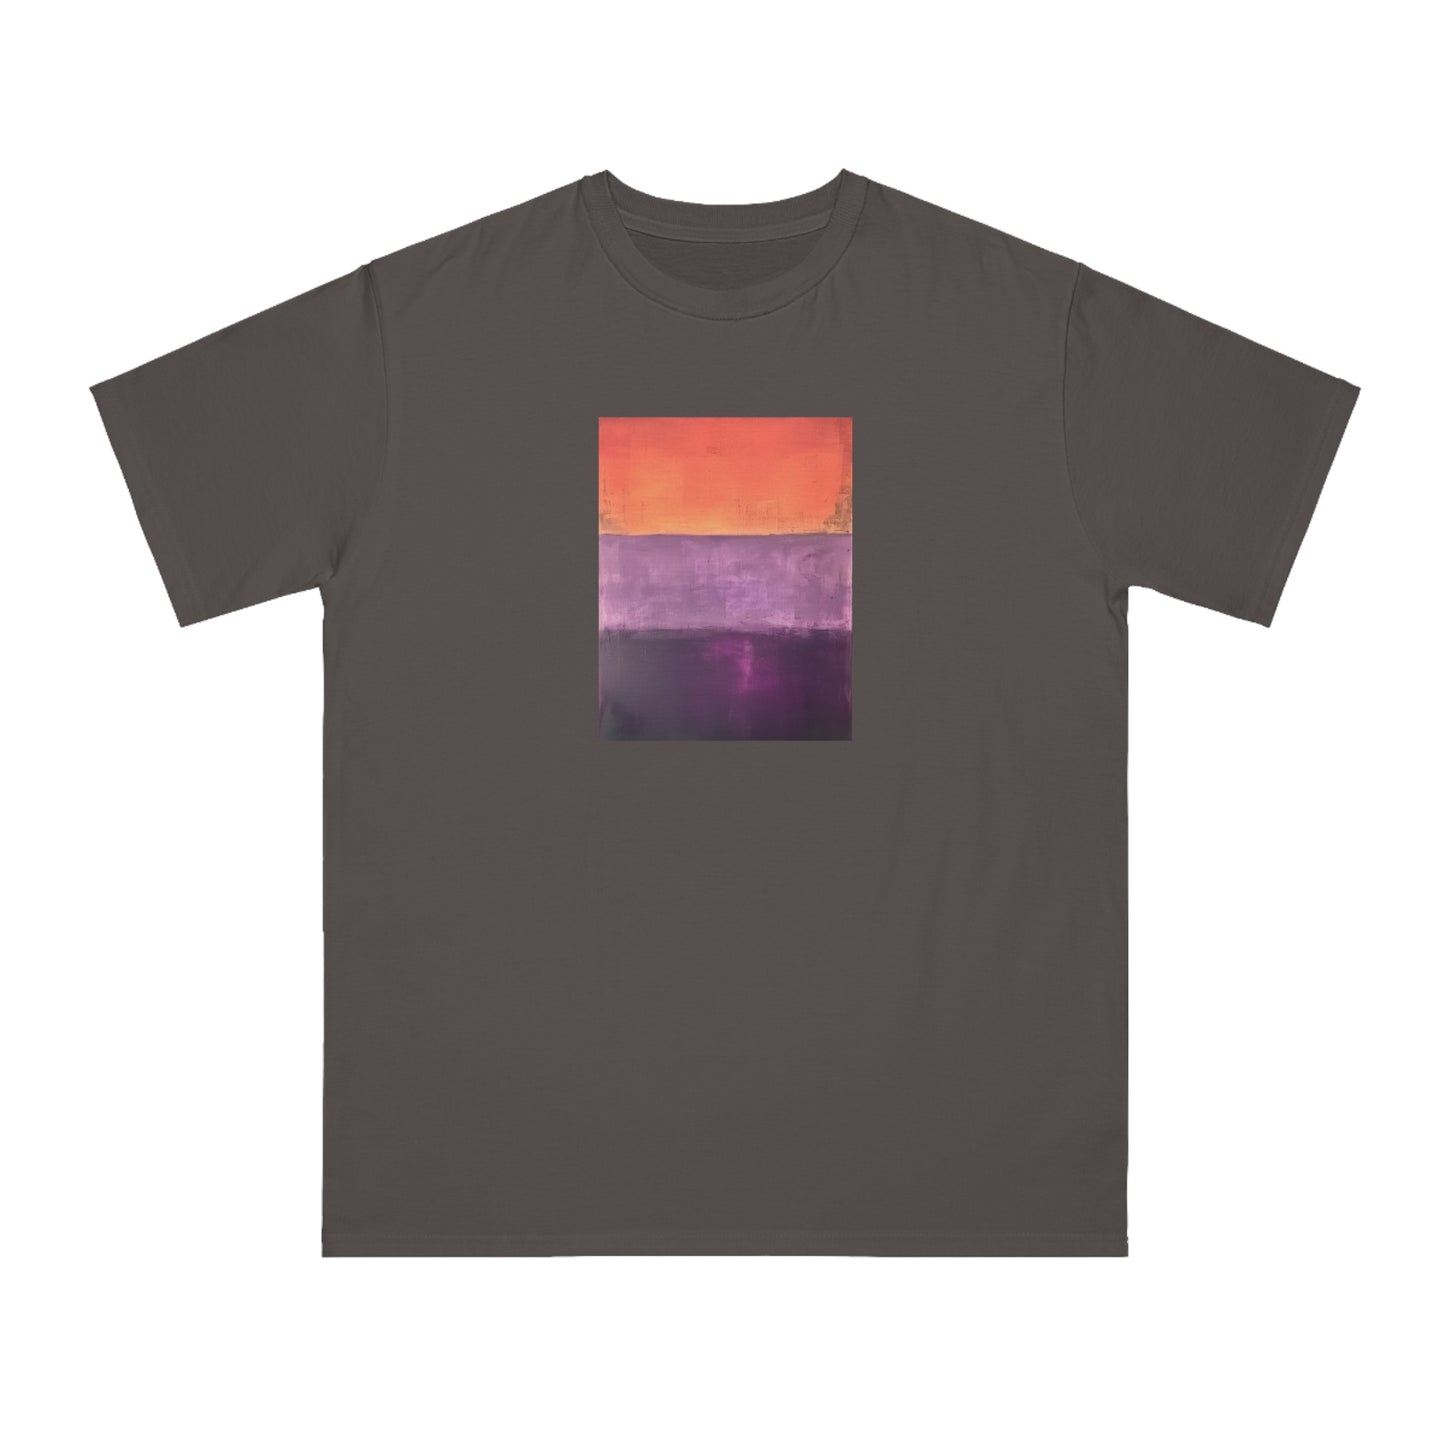 a t - shirt with an orange and purple painting on it